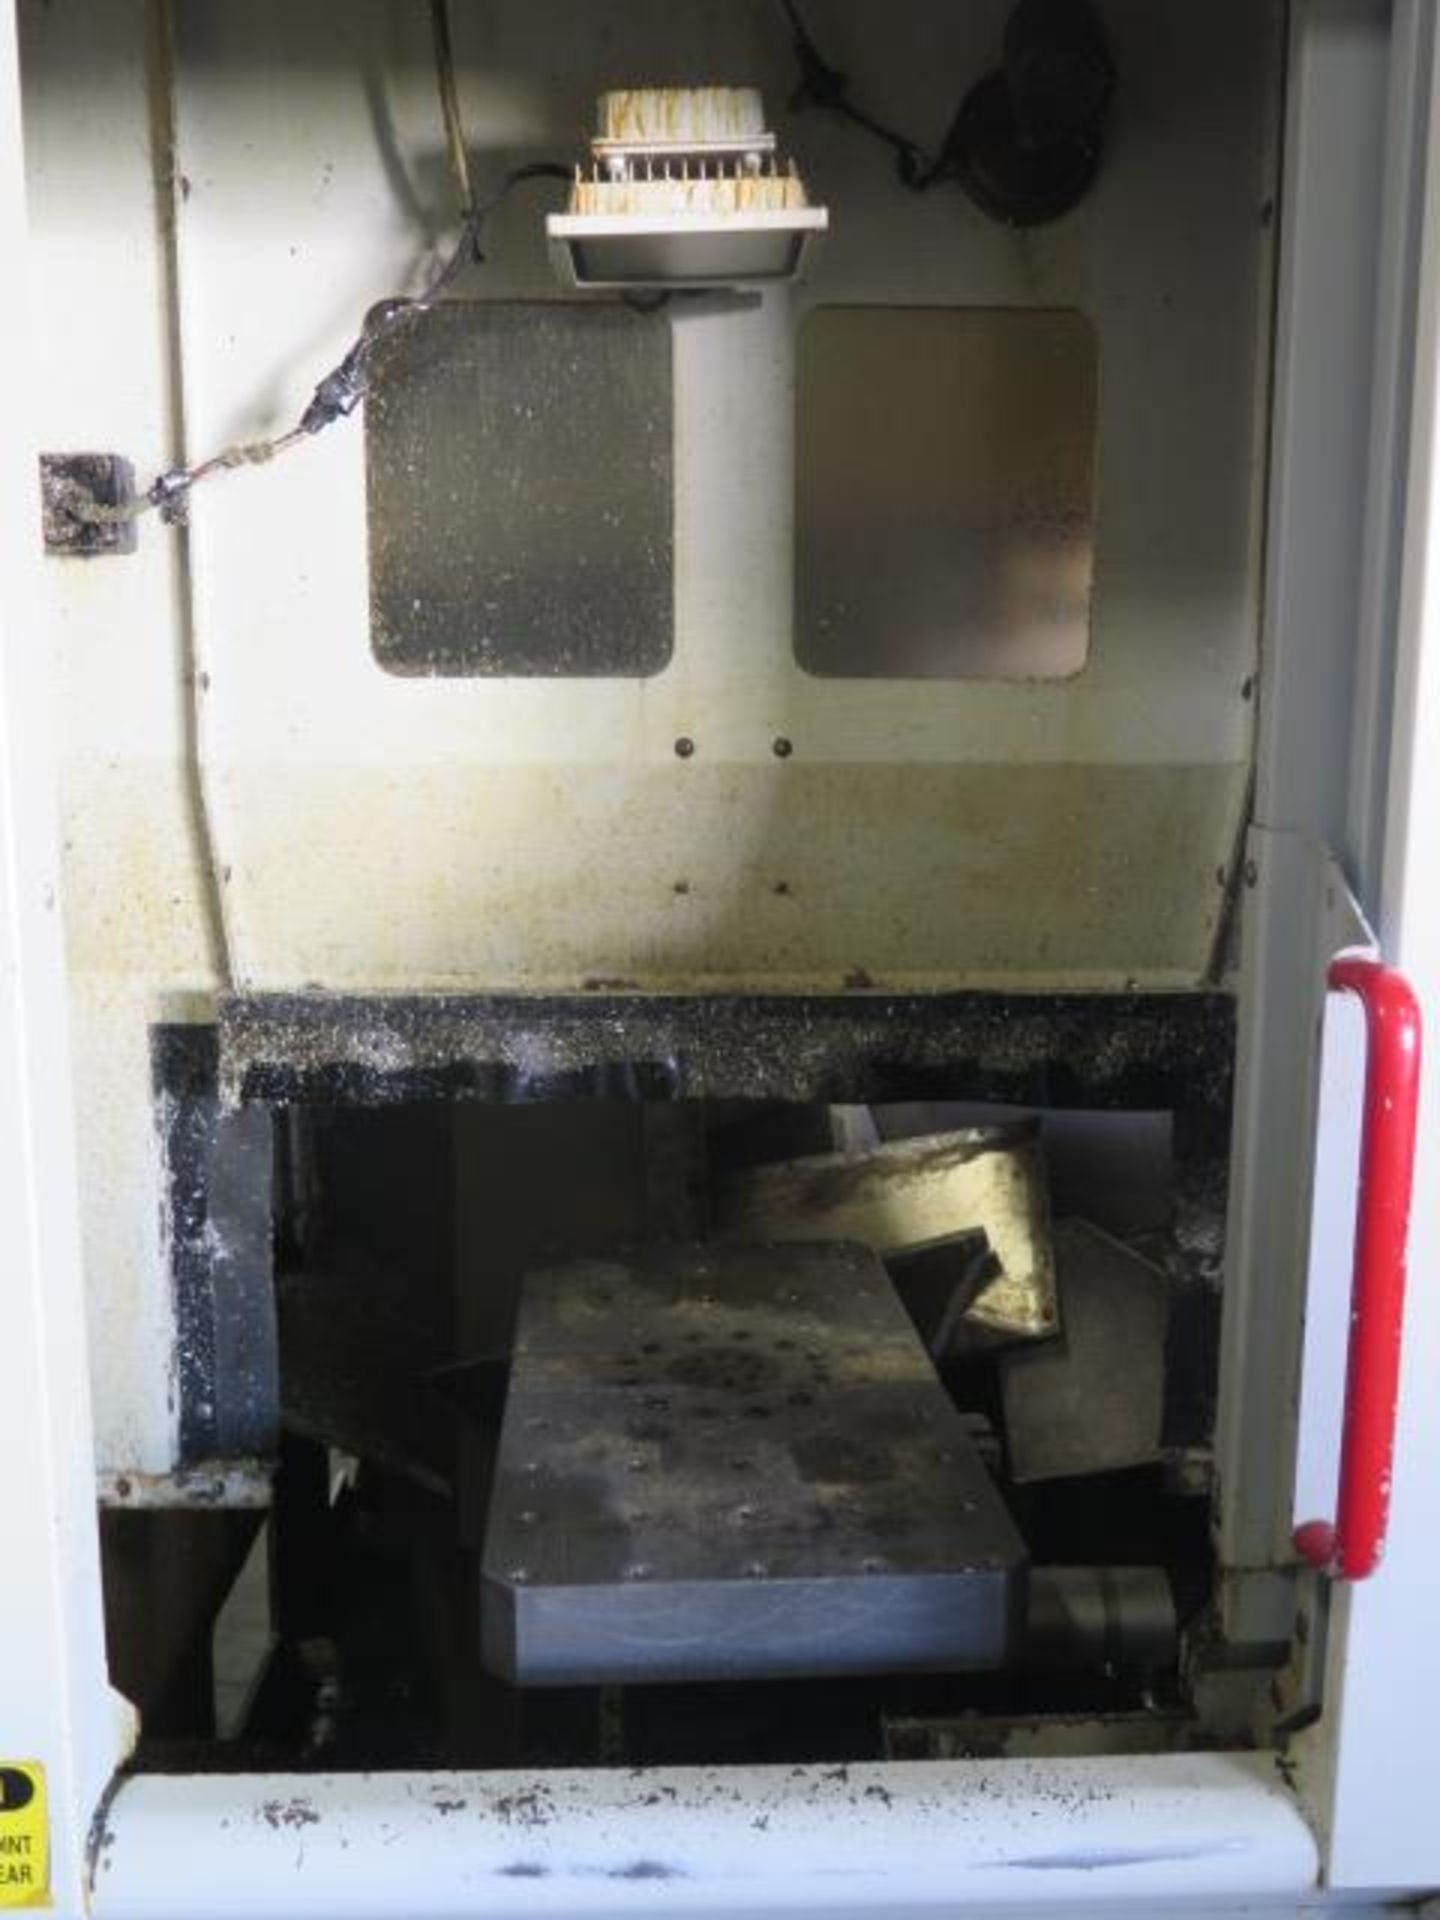 2002 Haas MDC-1 Dual Pallet CNC Milling Center s/n 29420 (Pallet Changer Needs Repair), SOLD AS IS - Image 11 of 16